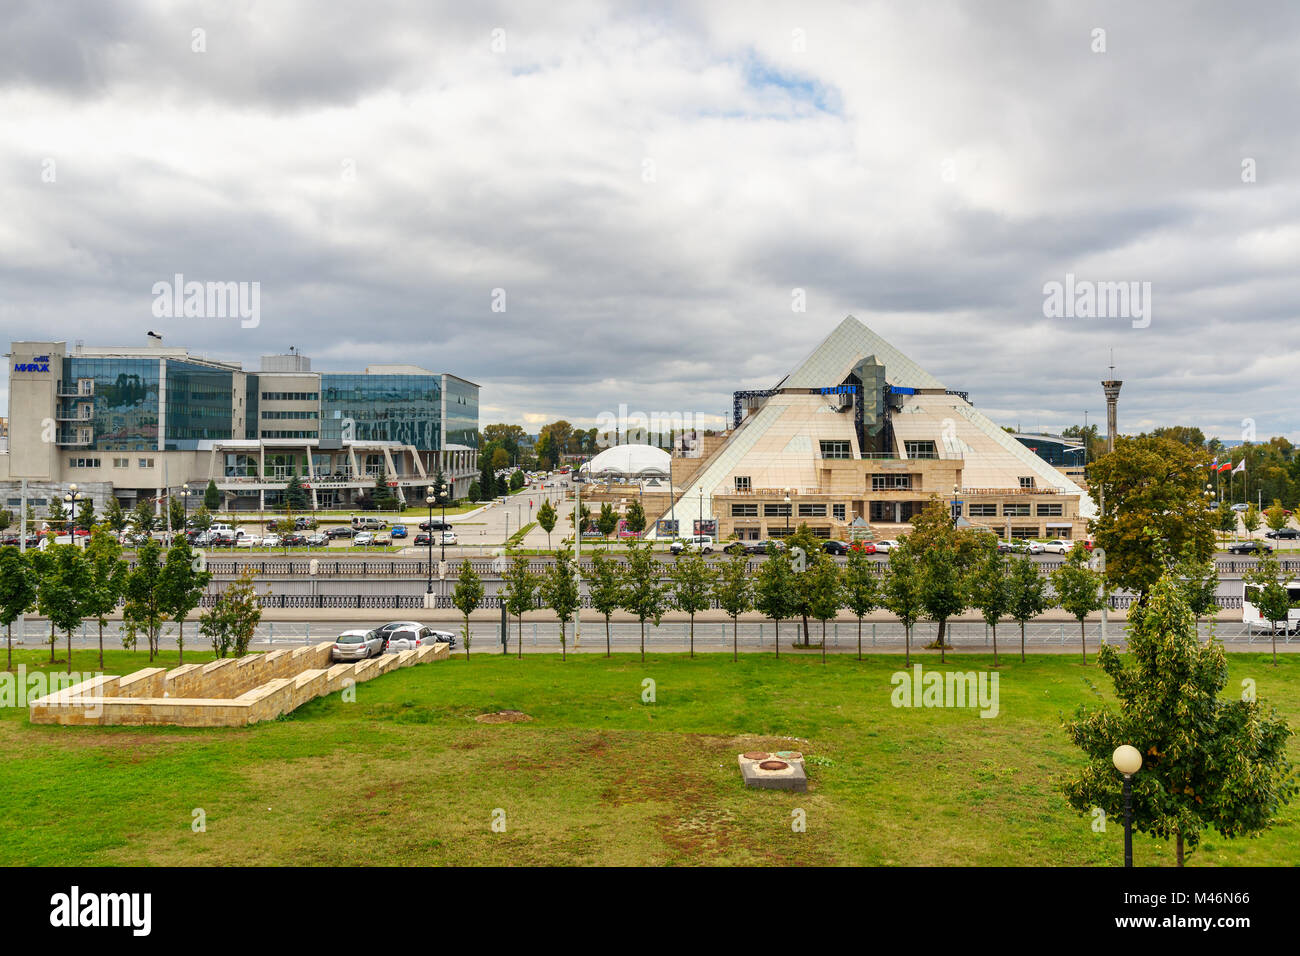 Kazan. Russia - September 21, 2017: View of the street in center city, Culture and entertainment complex Pyramid and hotel Mirage Stock Photo